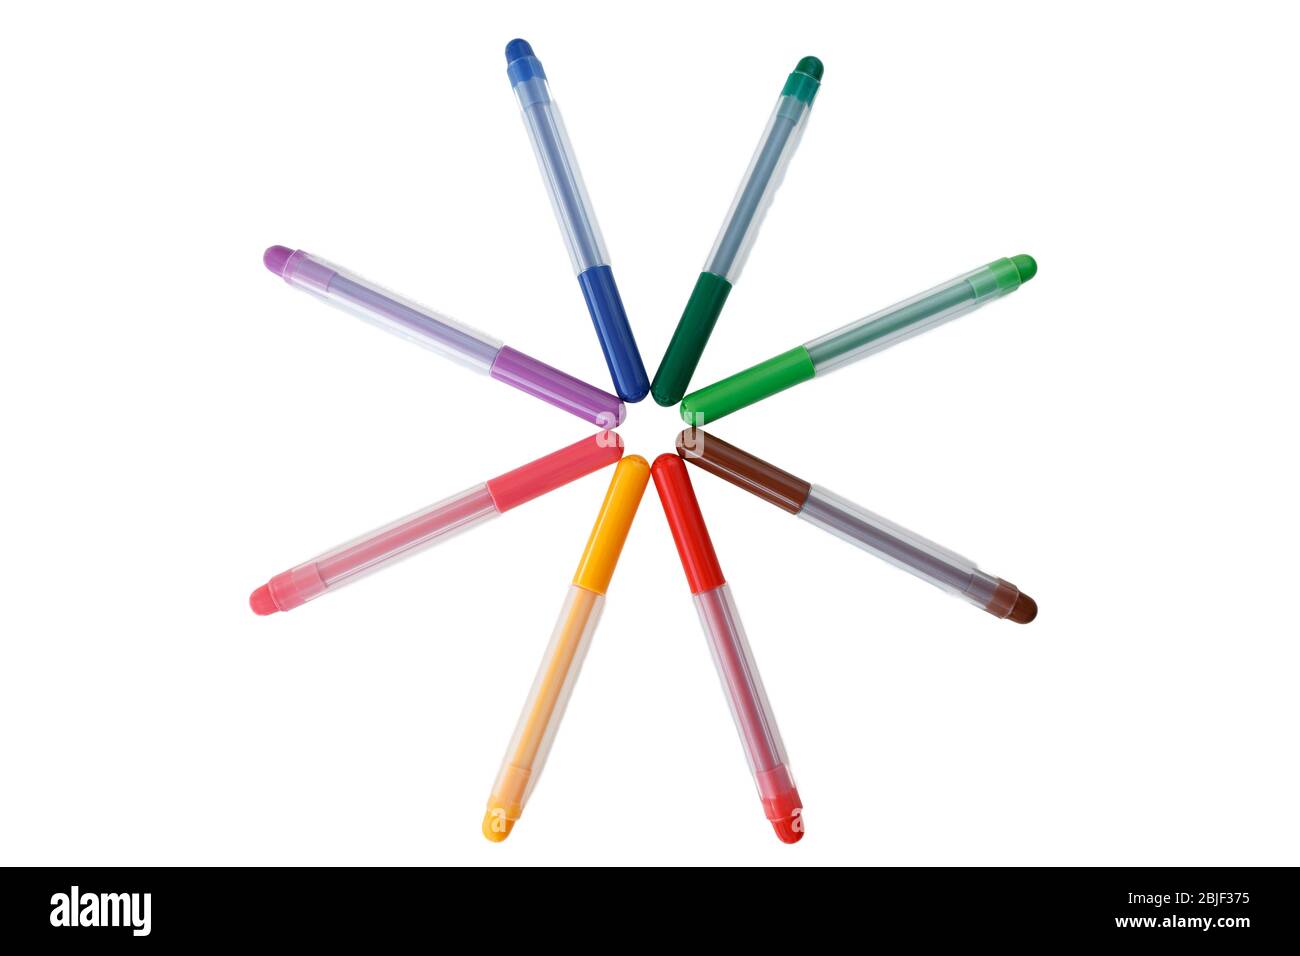 Group Of Colored Markers Isolated On A White Background. Stock